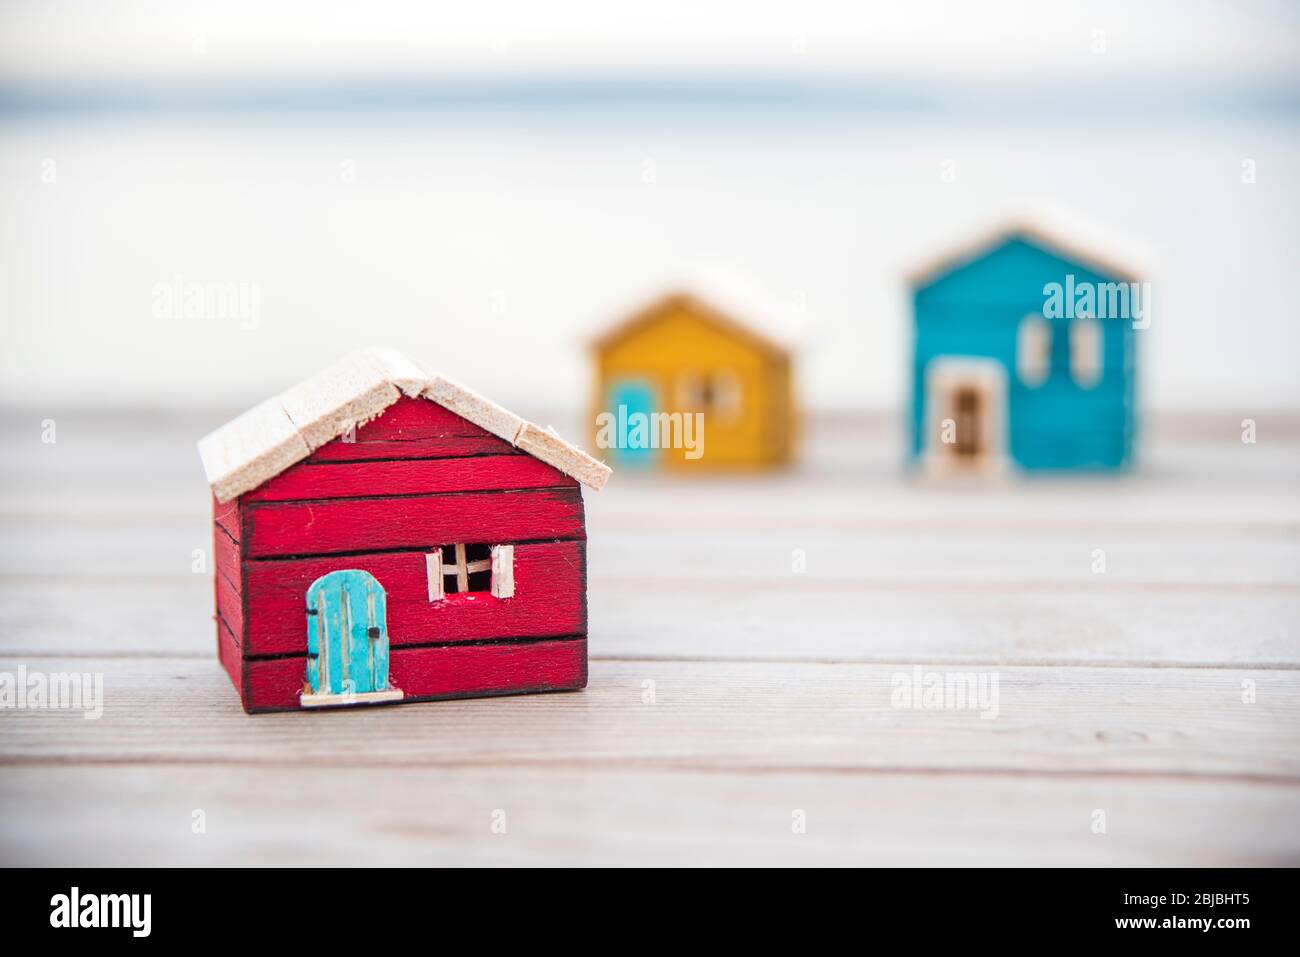 wooden model house on the beach. stay at home stay safe Stock Photo